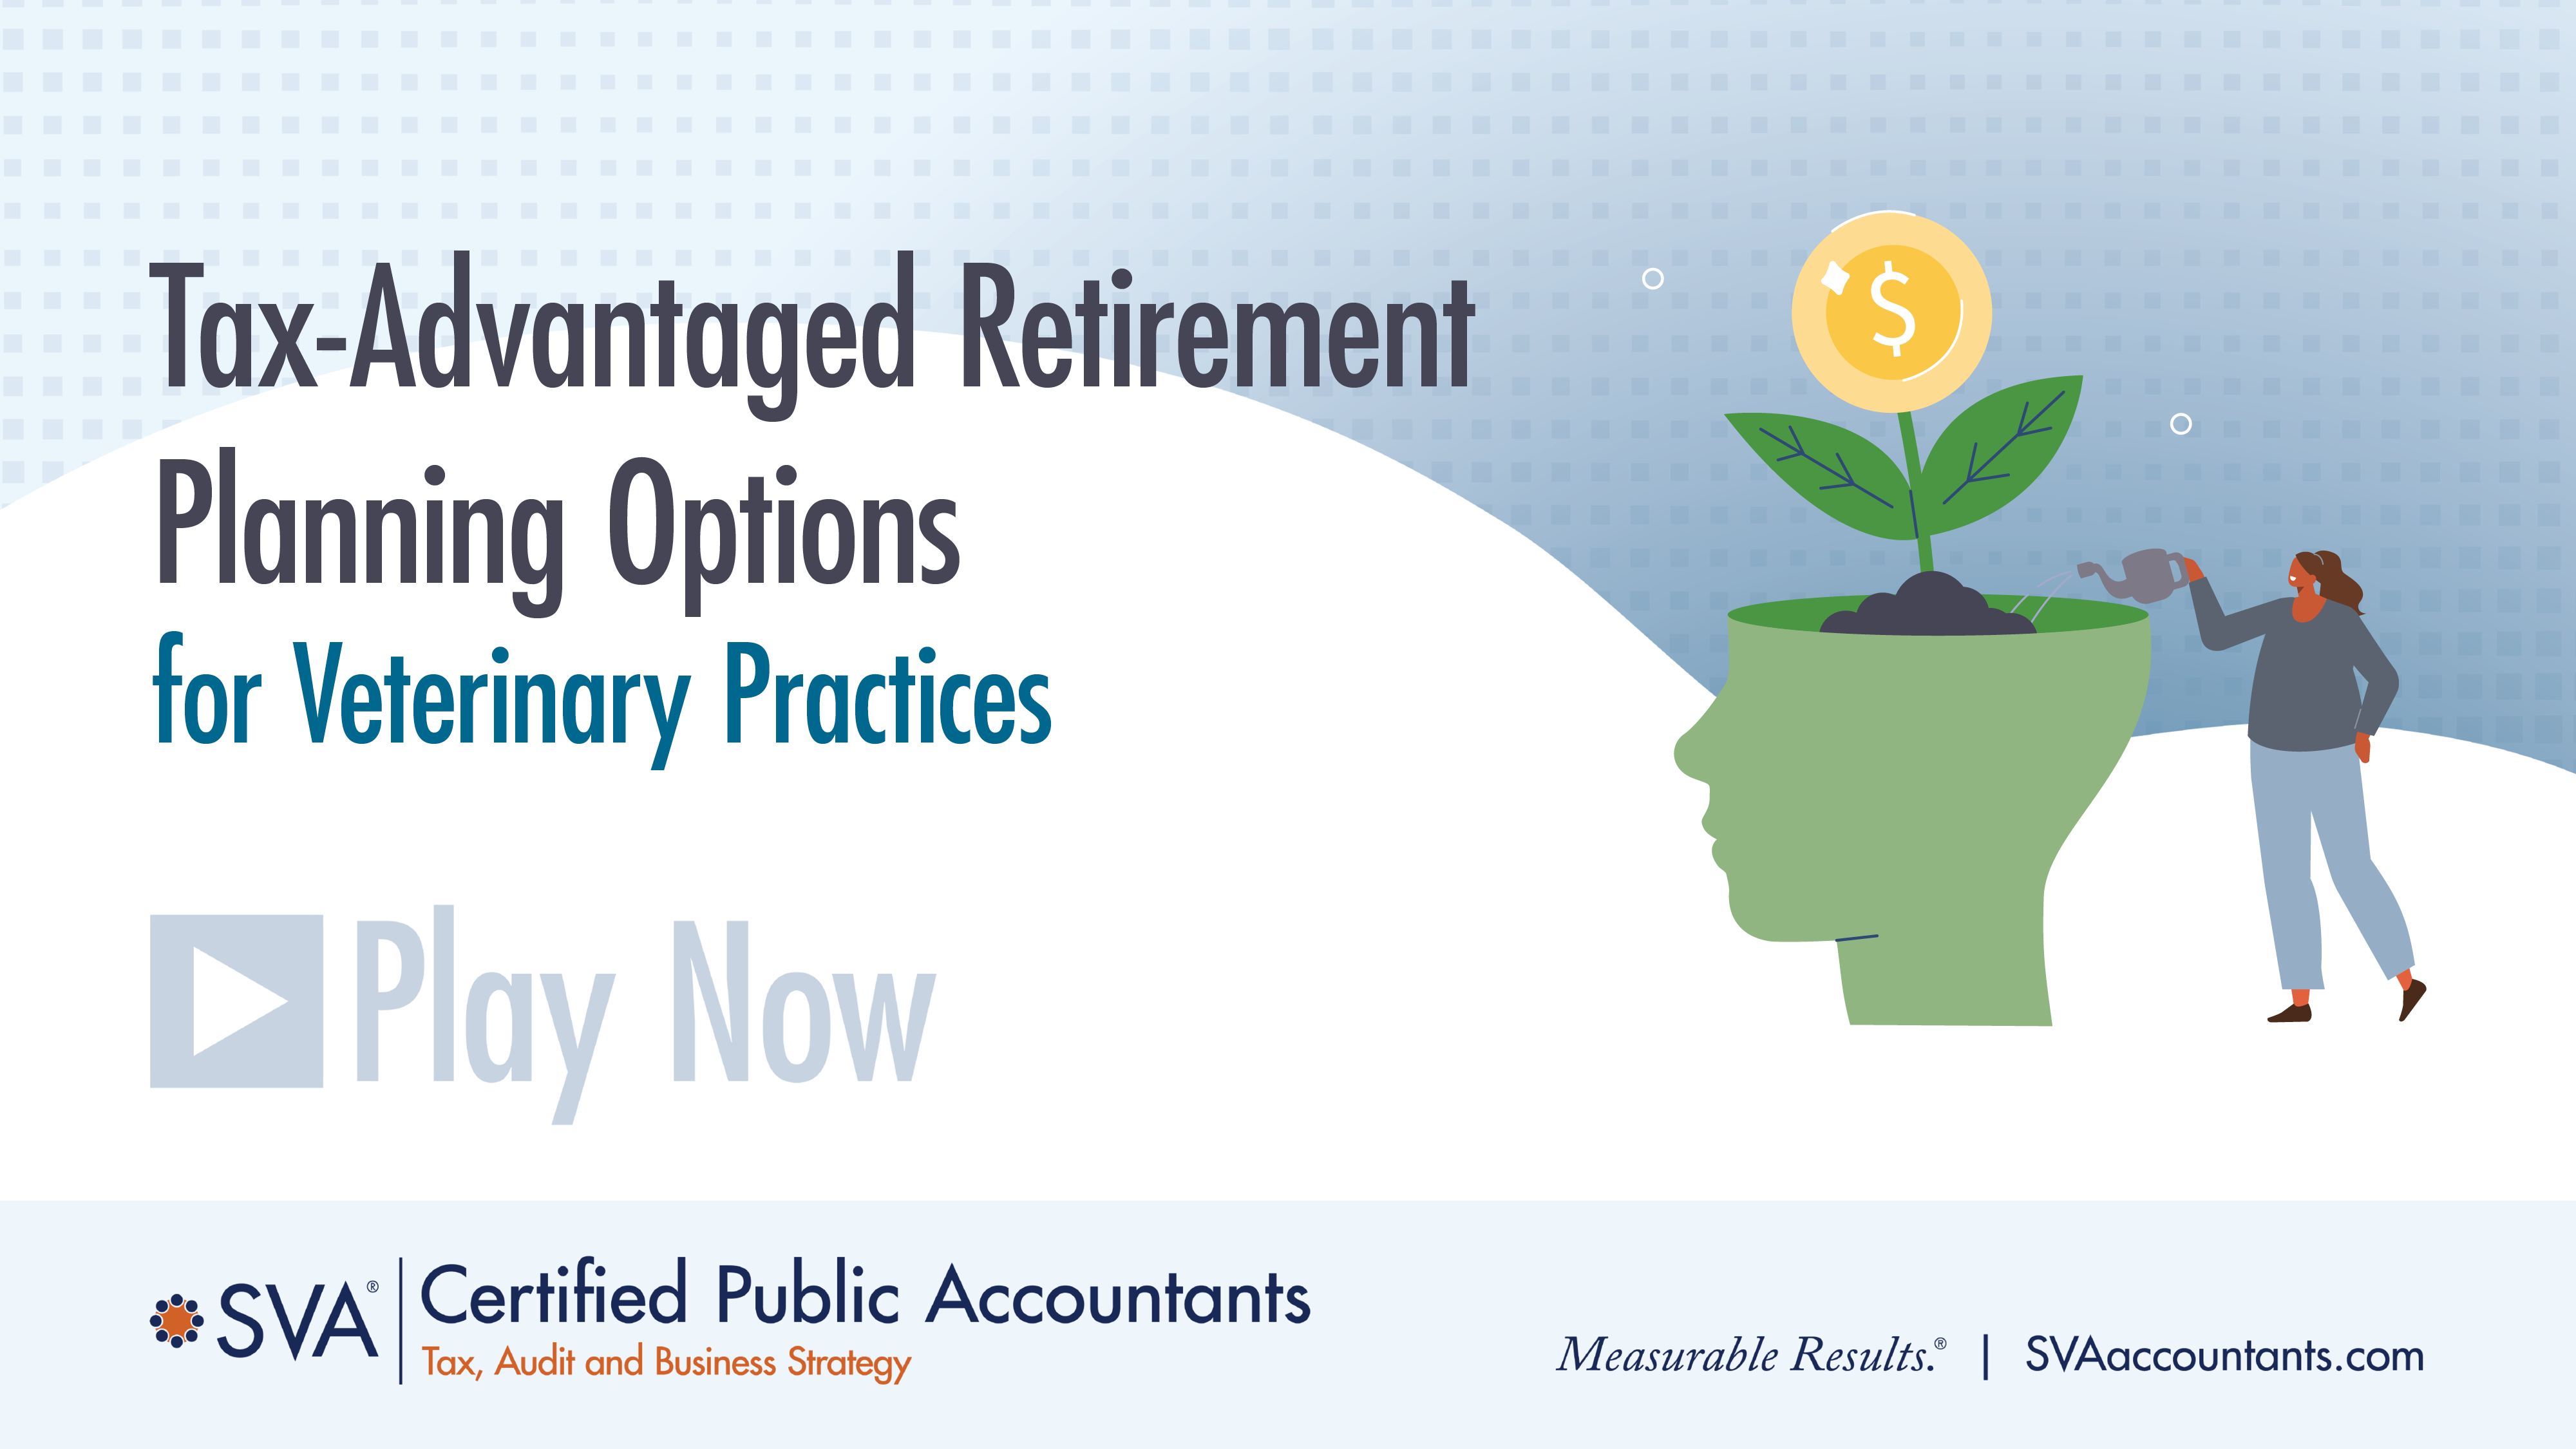 Tax-Advantaged Retirement Planning for Veterinary Practices